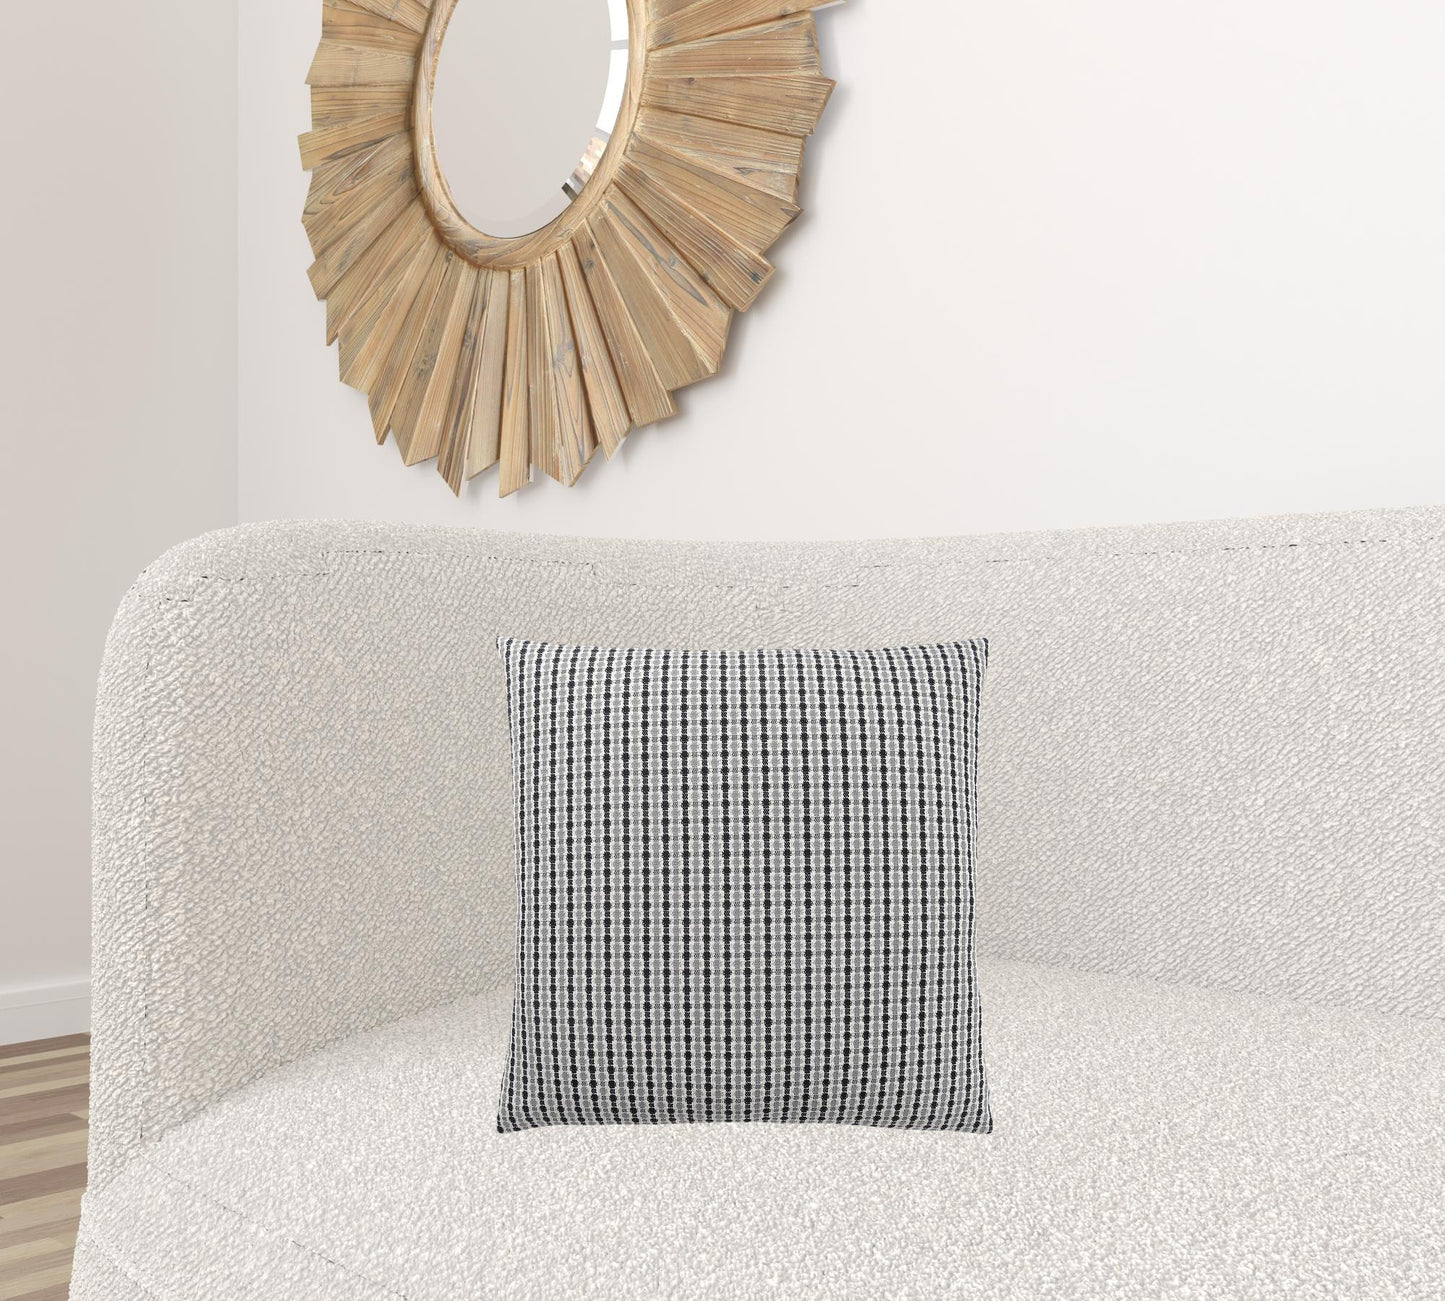 Set Of Two 18" X 18" Taupe Polyester Striped Zippered Pillow